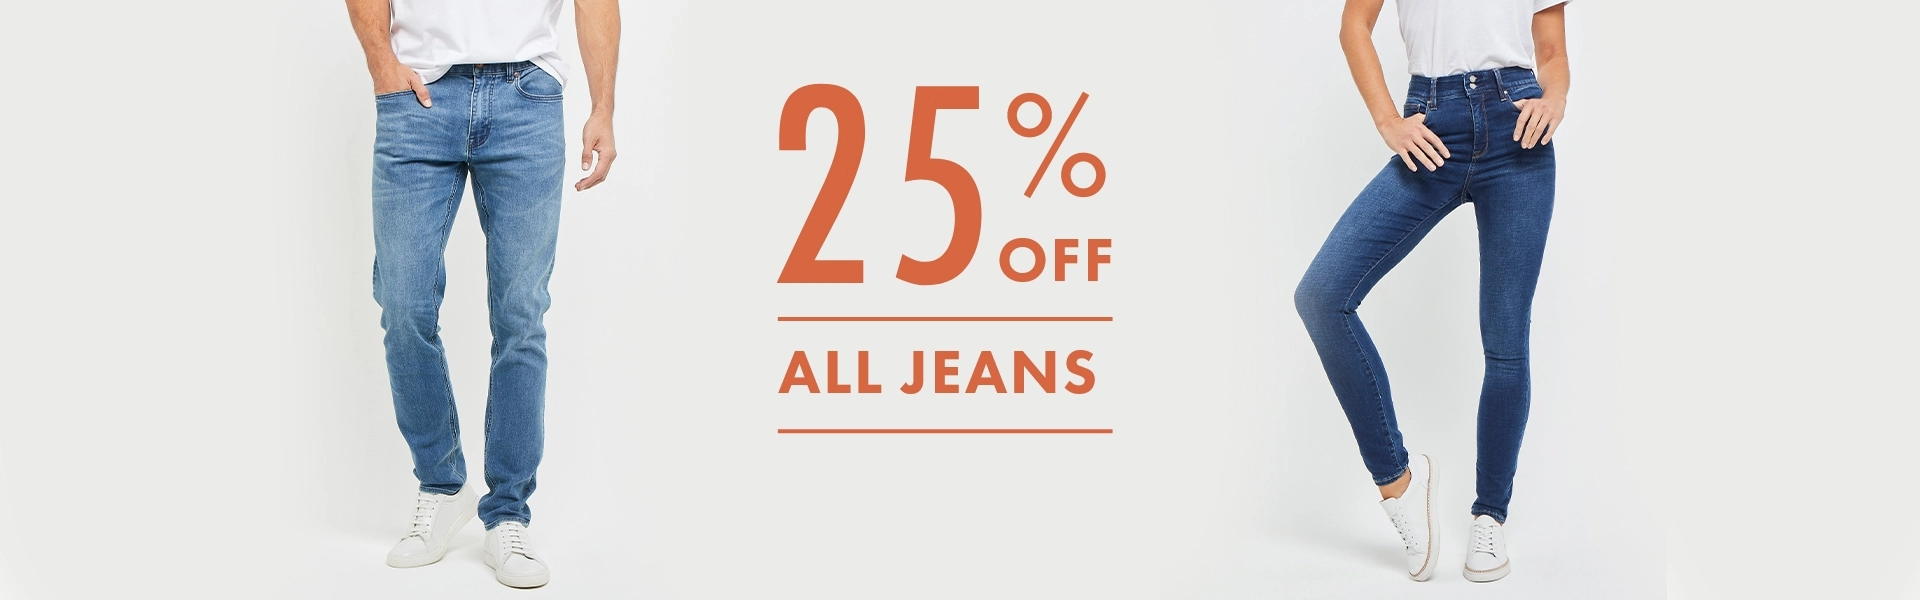 25% OFF all jeans for men & women @ Jeanswest, free delivery $75+